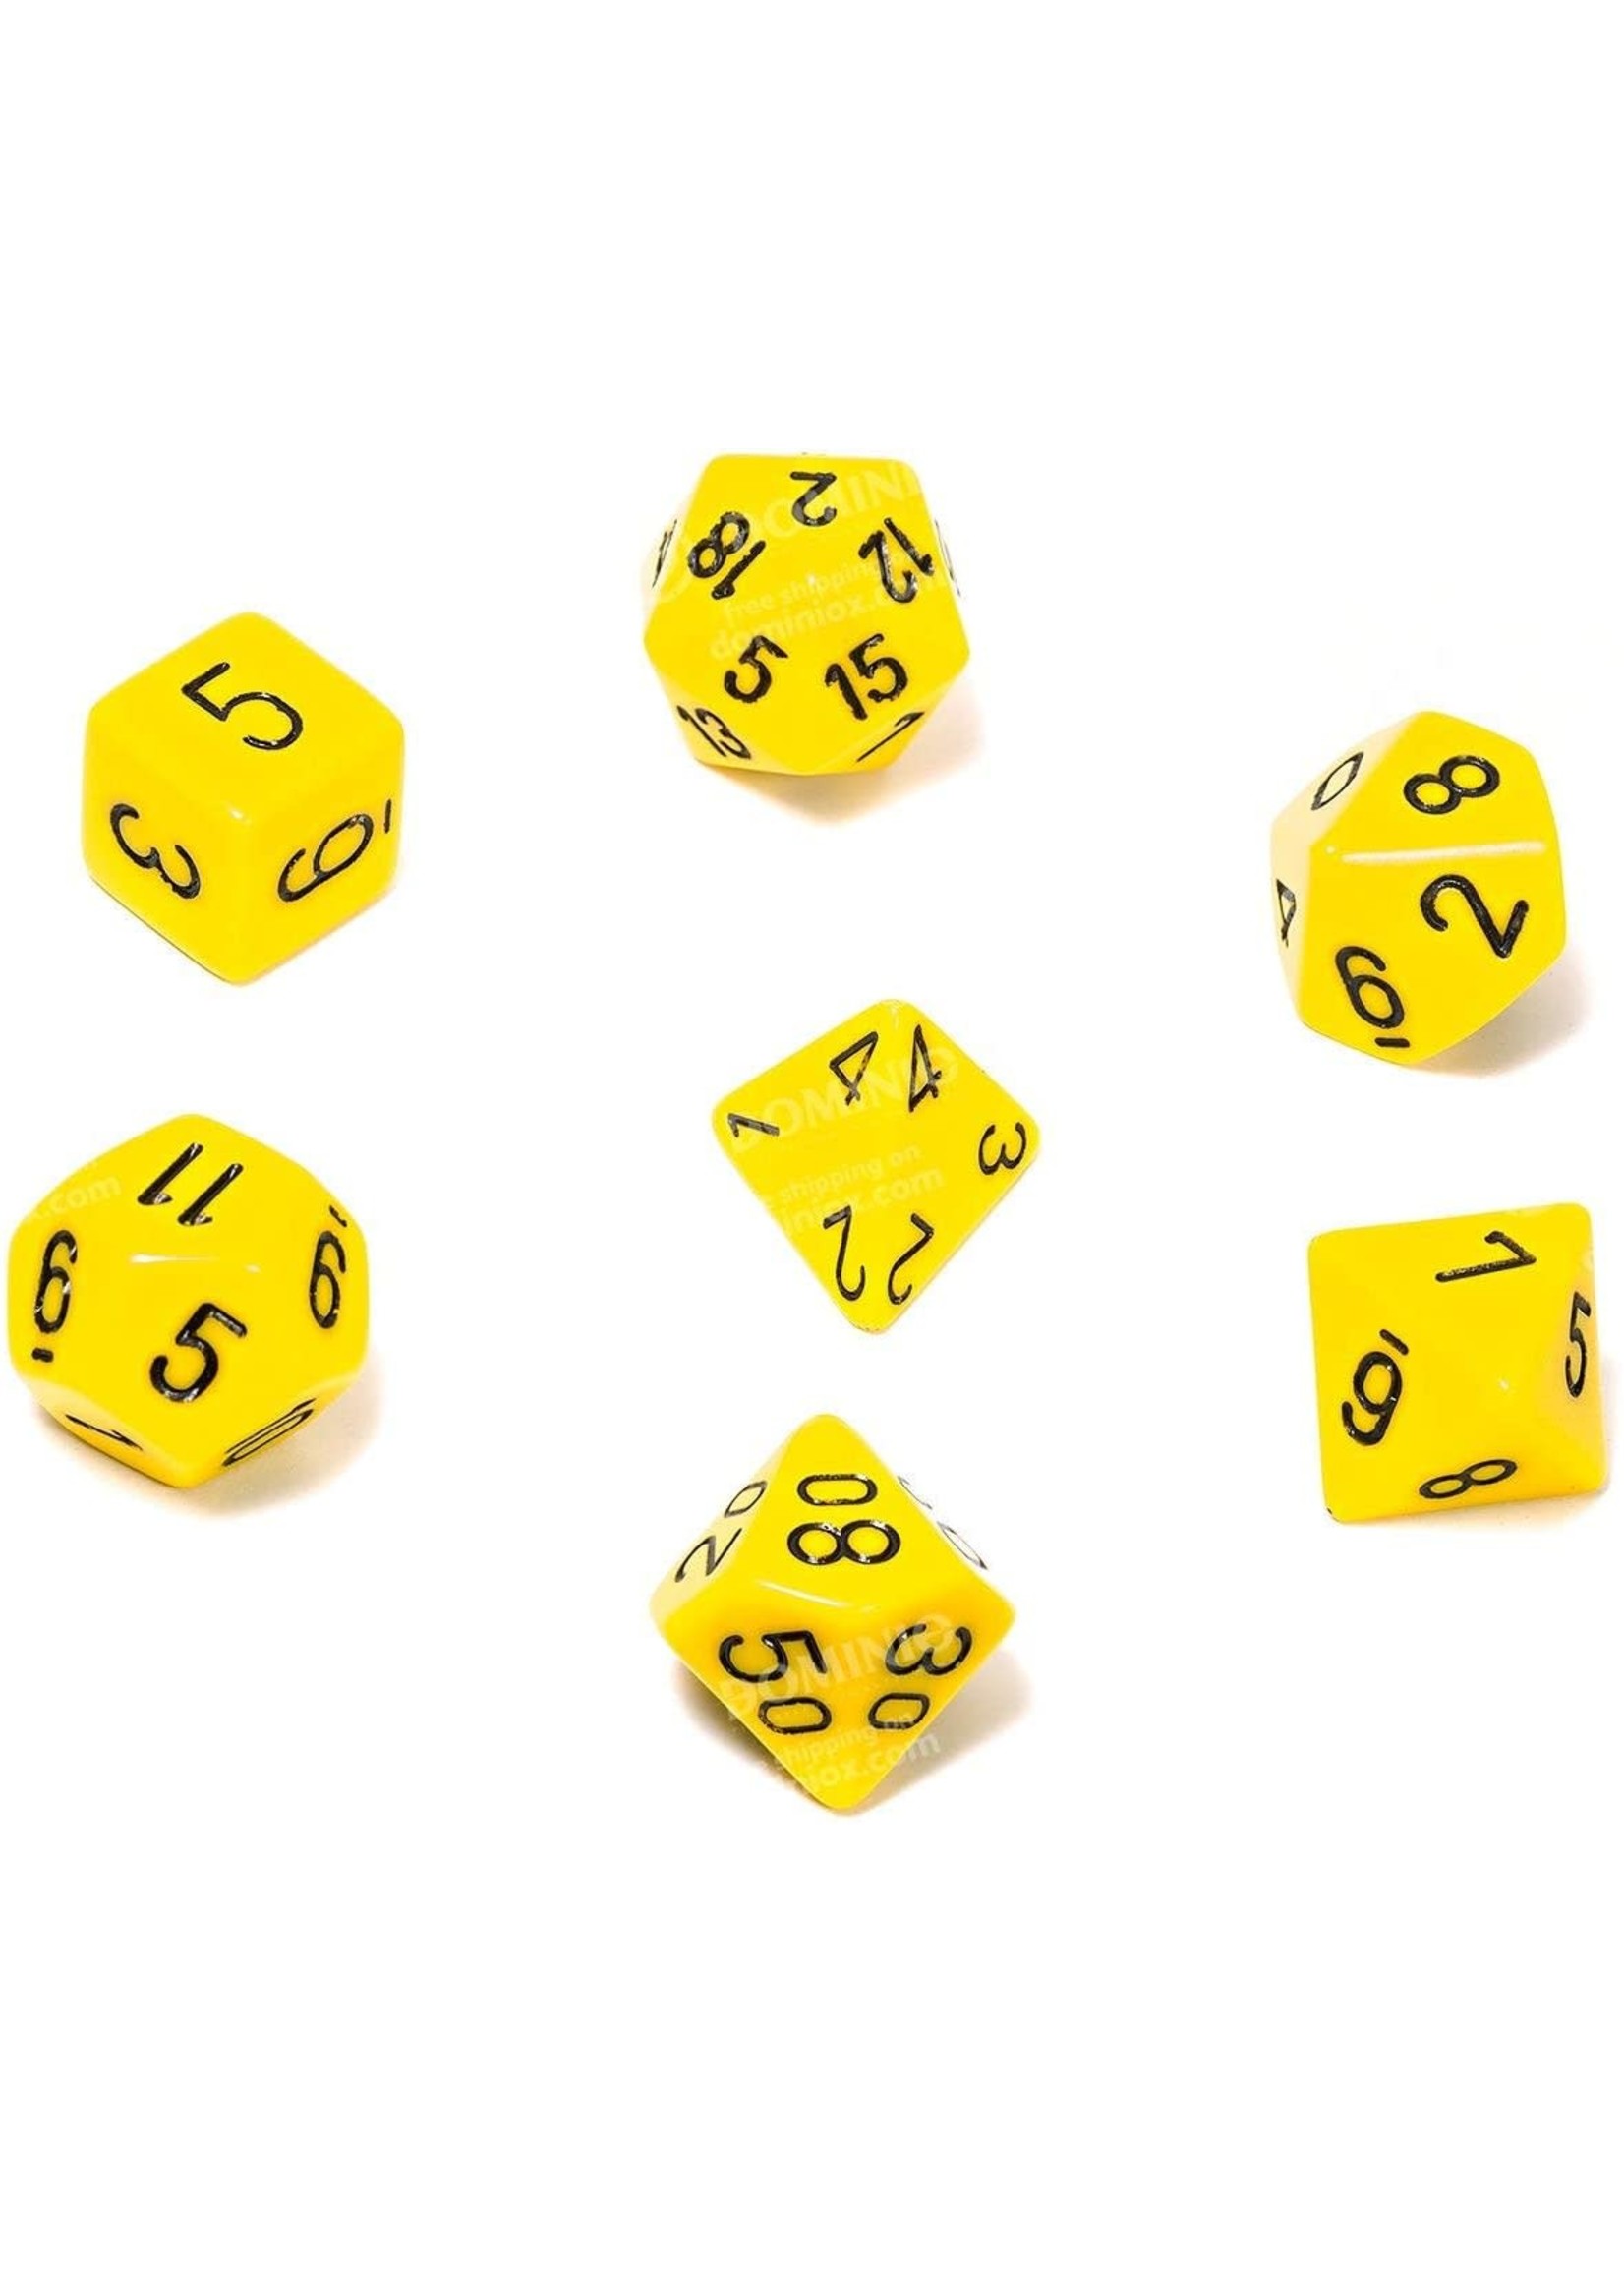 Chessex Opaque Poly 7 set: Yellow w/ Black